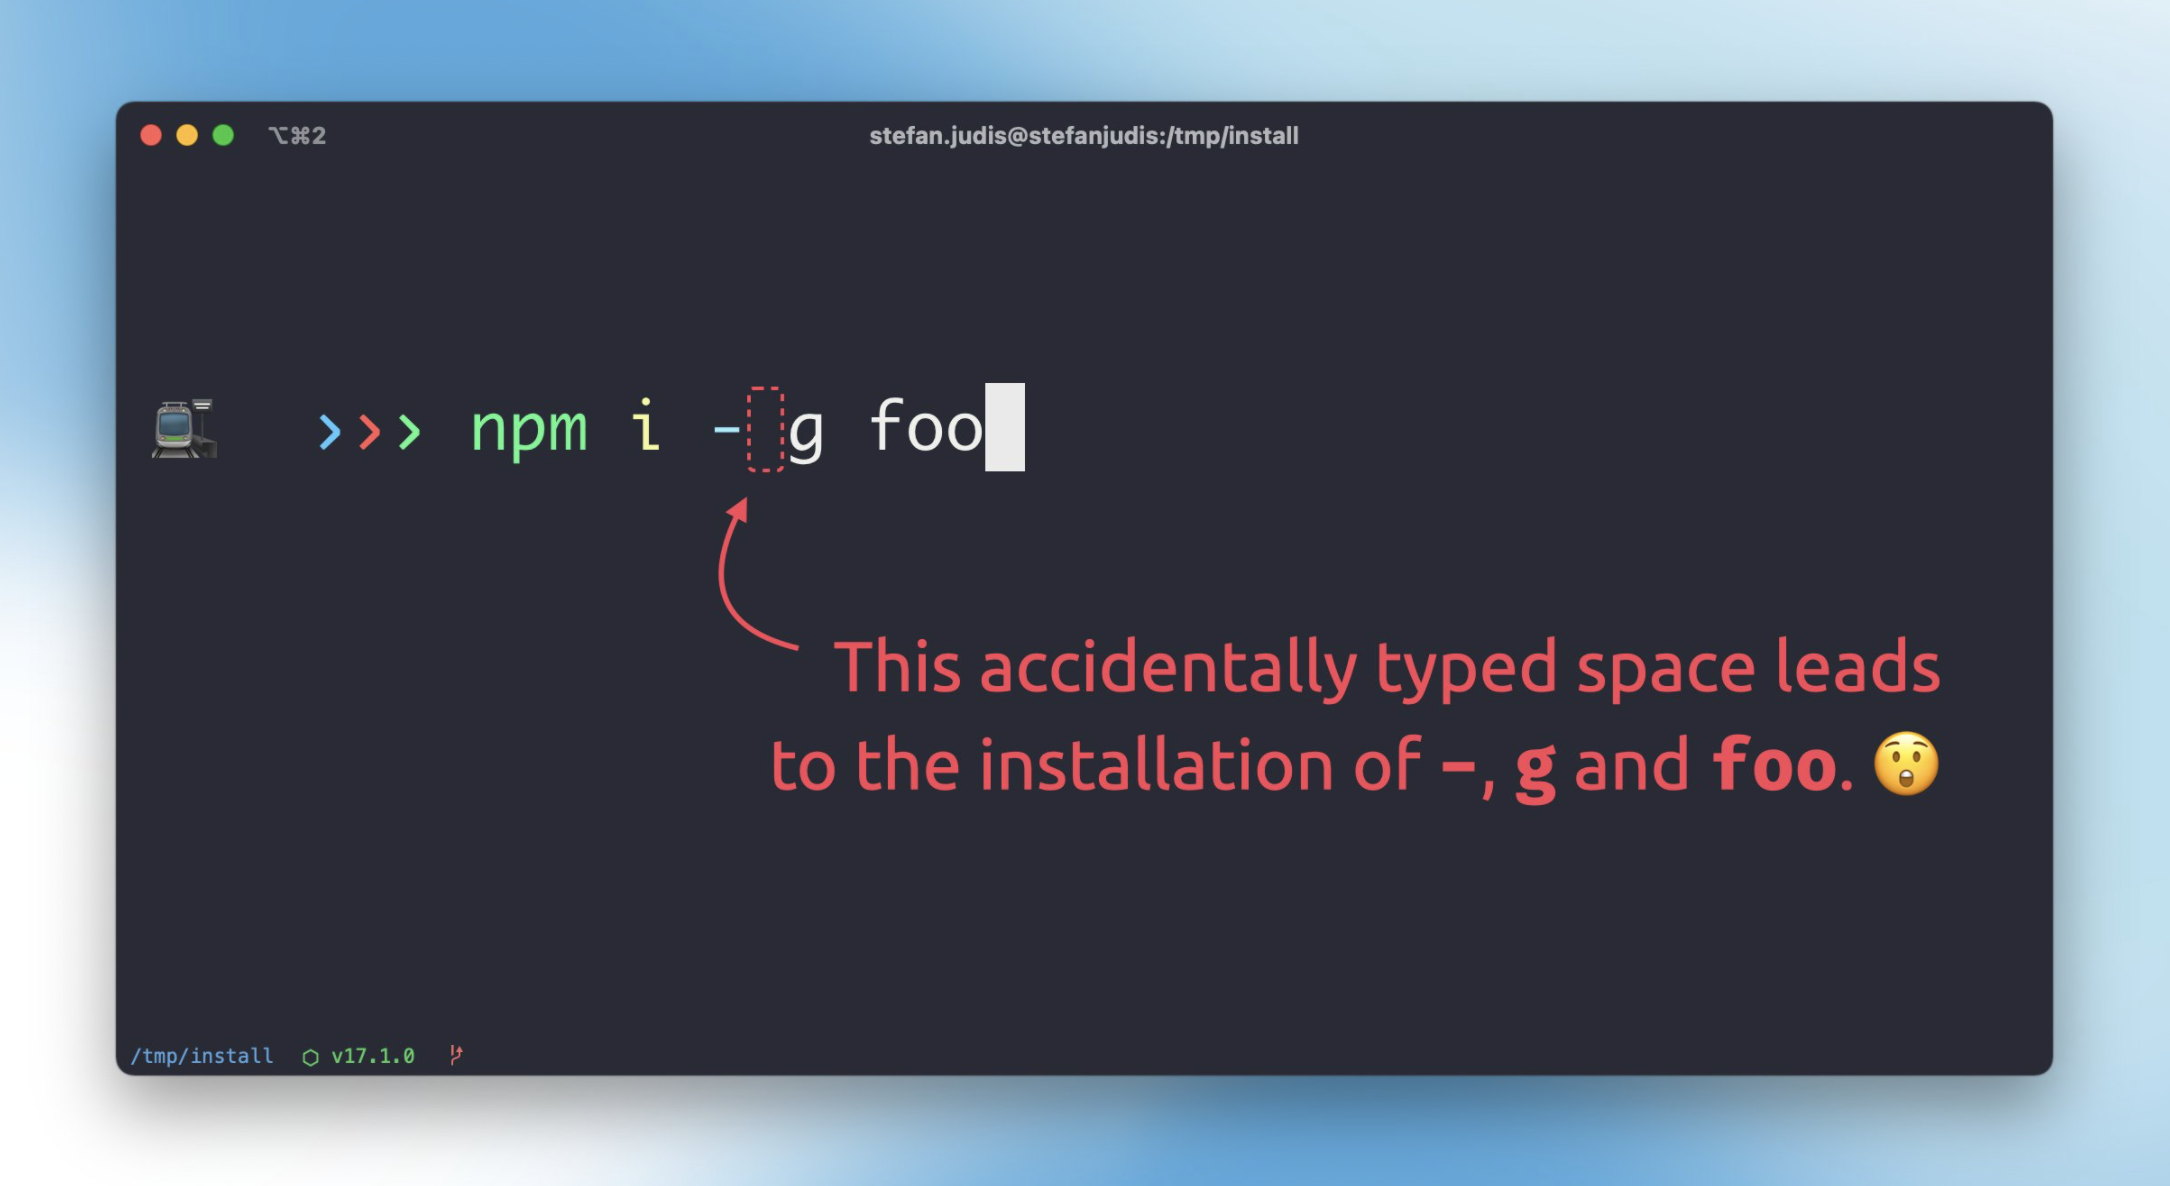 Terminal showing the command "npm i - g foo" which accidentally installs the "-", "g" and "foo" package.